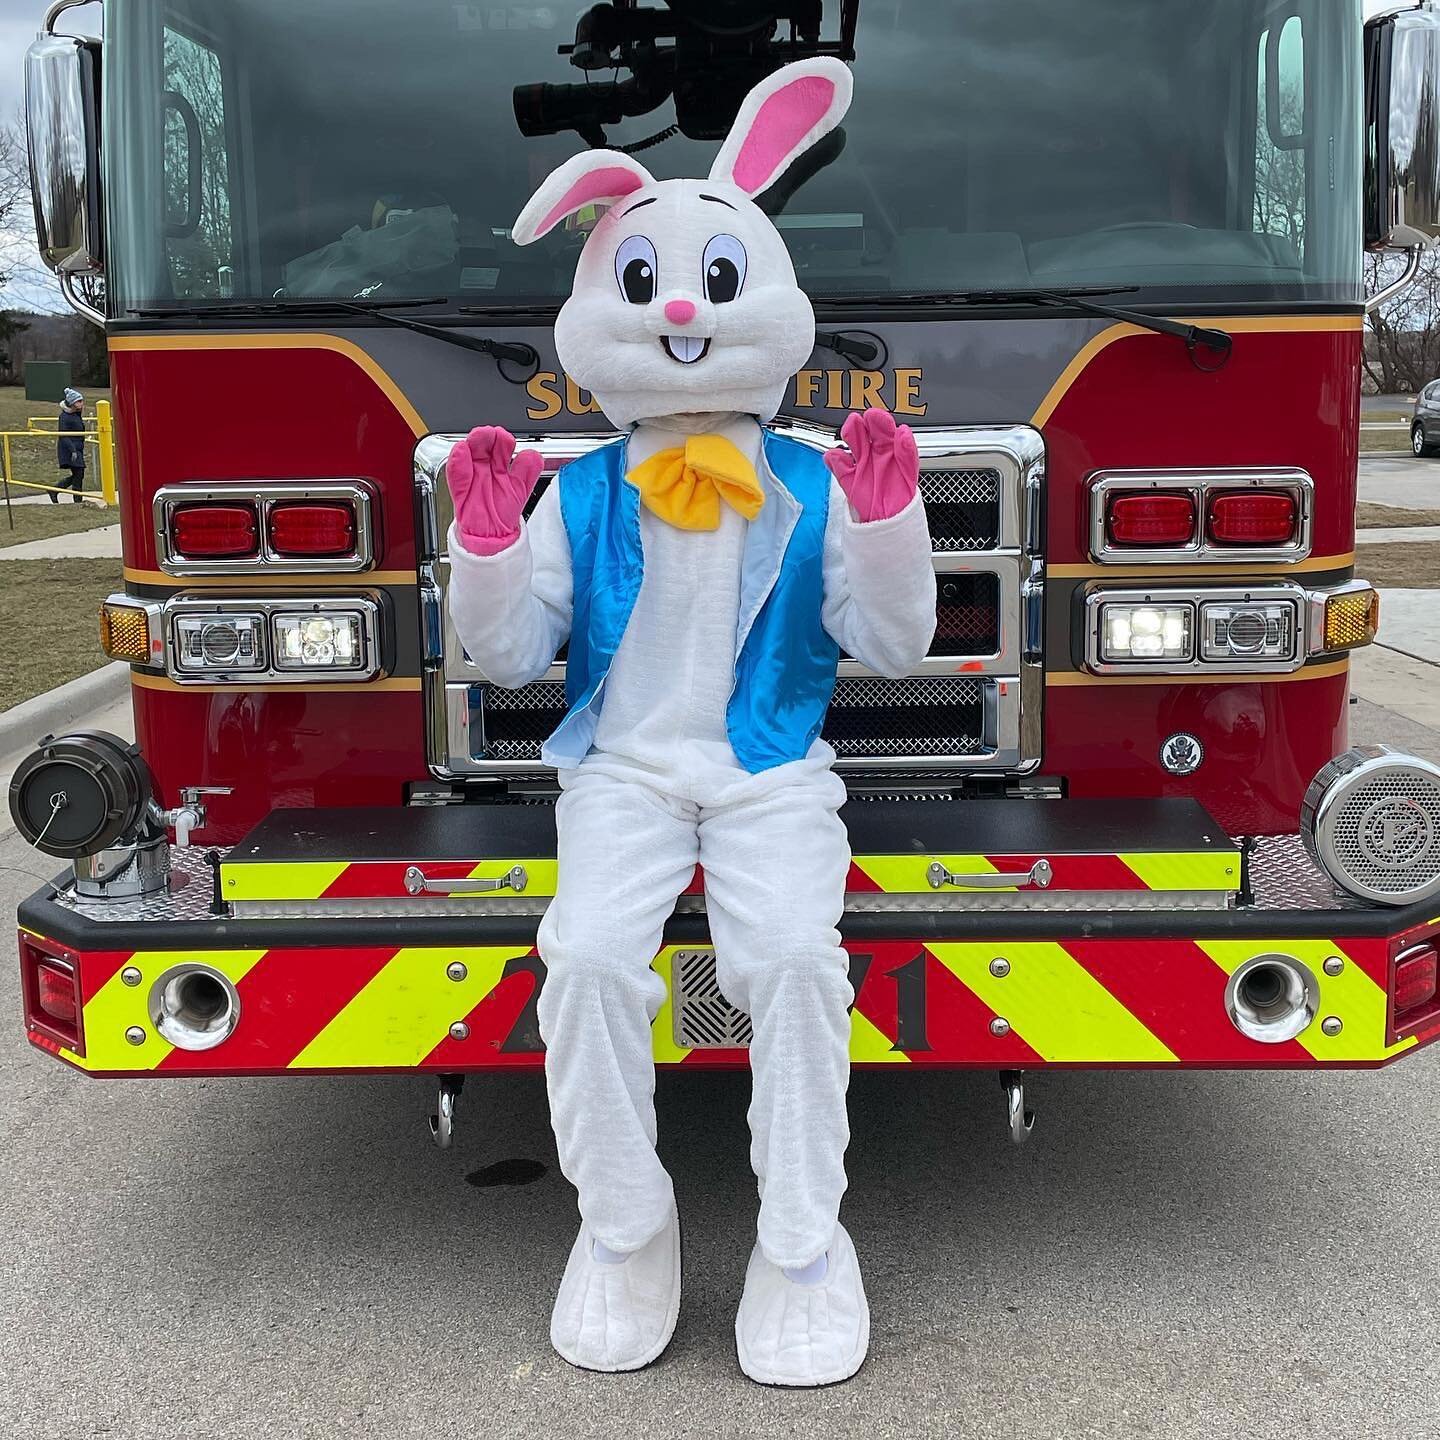 Happy Easter from Leo Club!! 🐣🌷✝️
Last weekend we had a great time volunteering at the Easter Egg Drop &amp; Story Hop in Sussex! Over 400 kids came to collect Easter eggs dropped from a local fire truck. Leos were in charge of registration, helpin